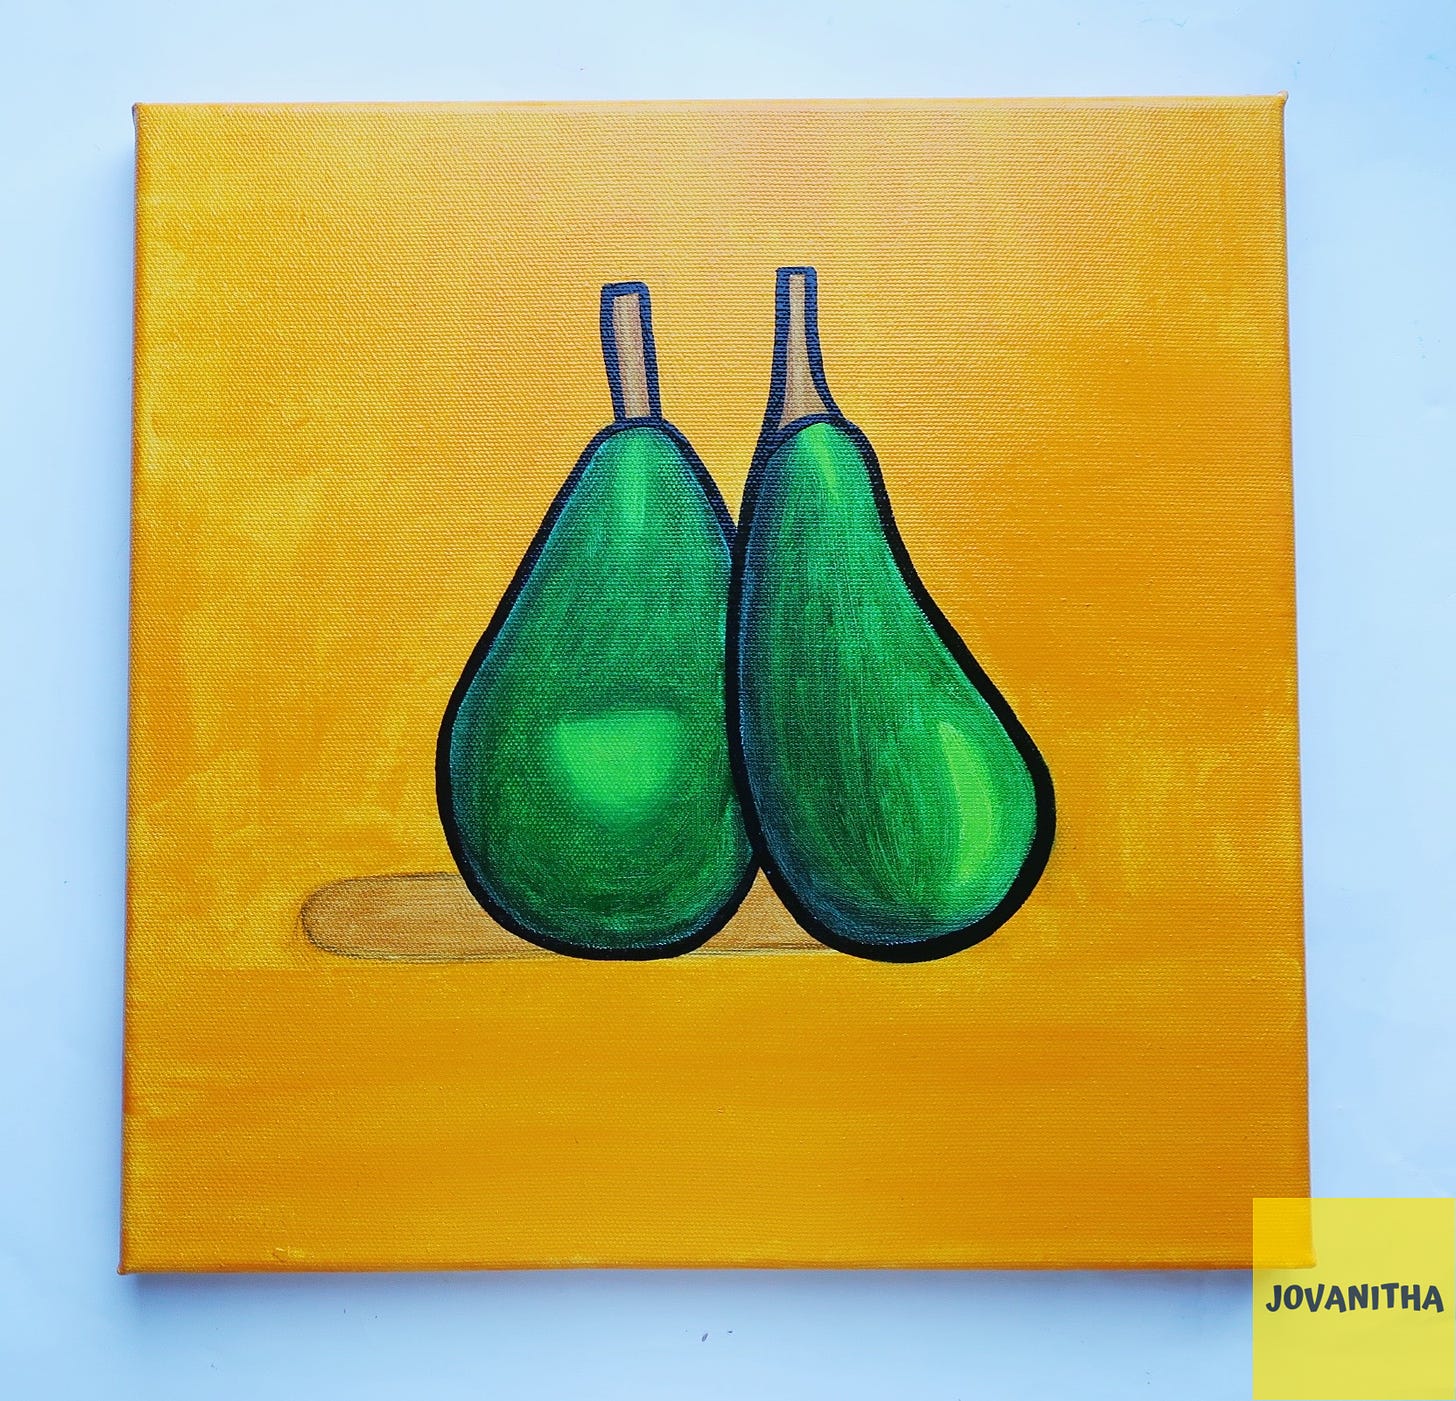 An oil painting of two green pears on a yellow background